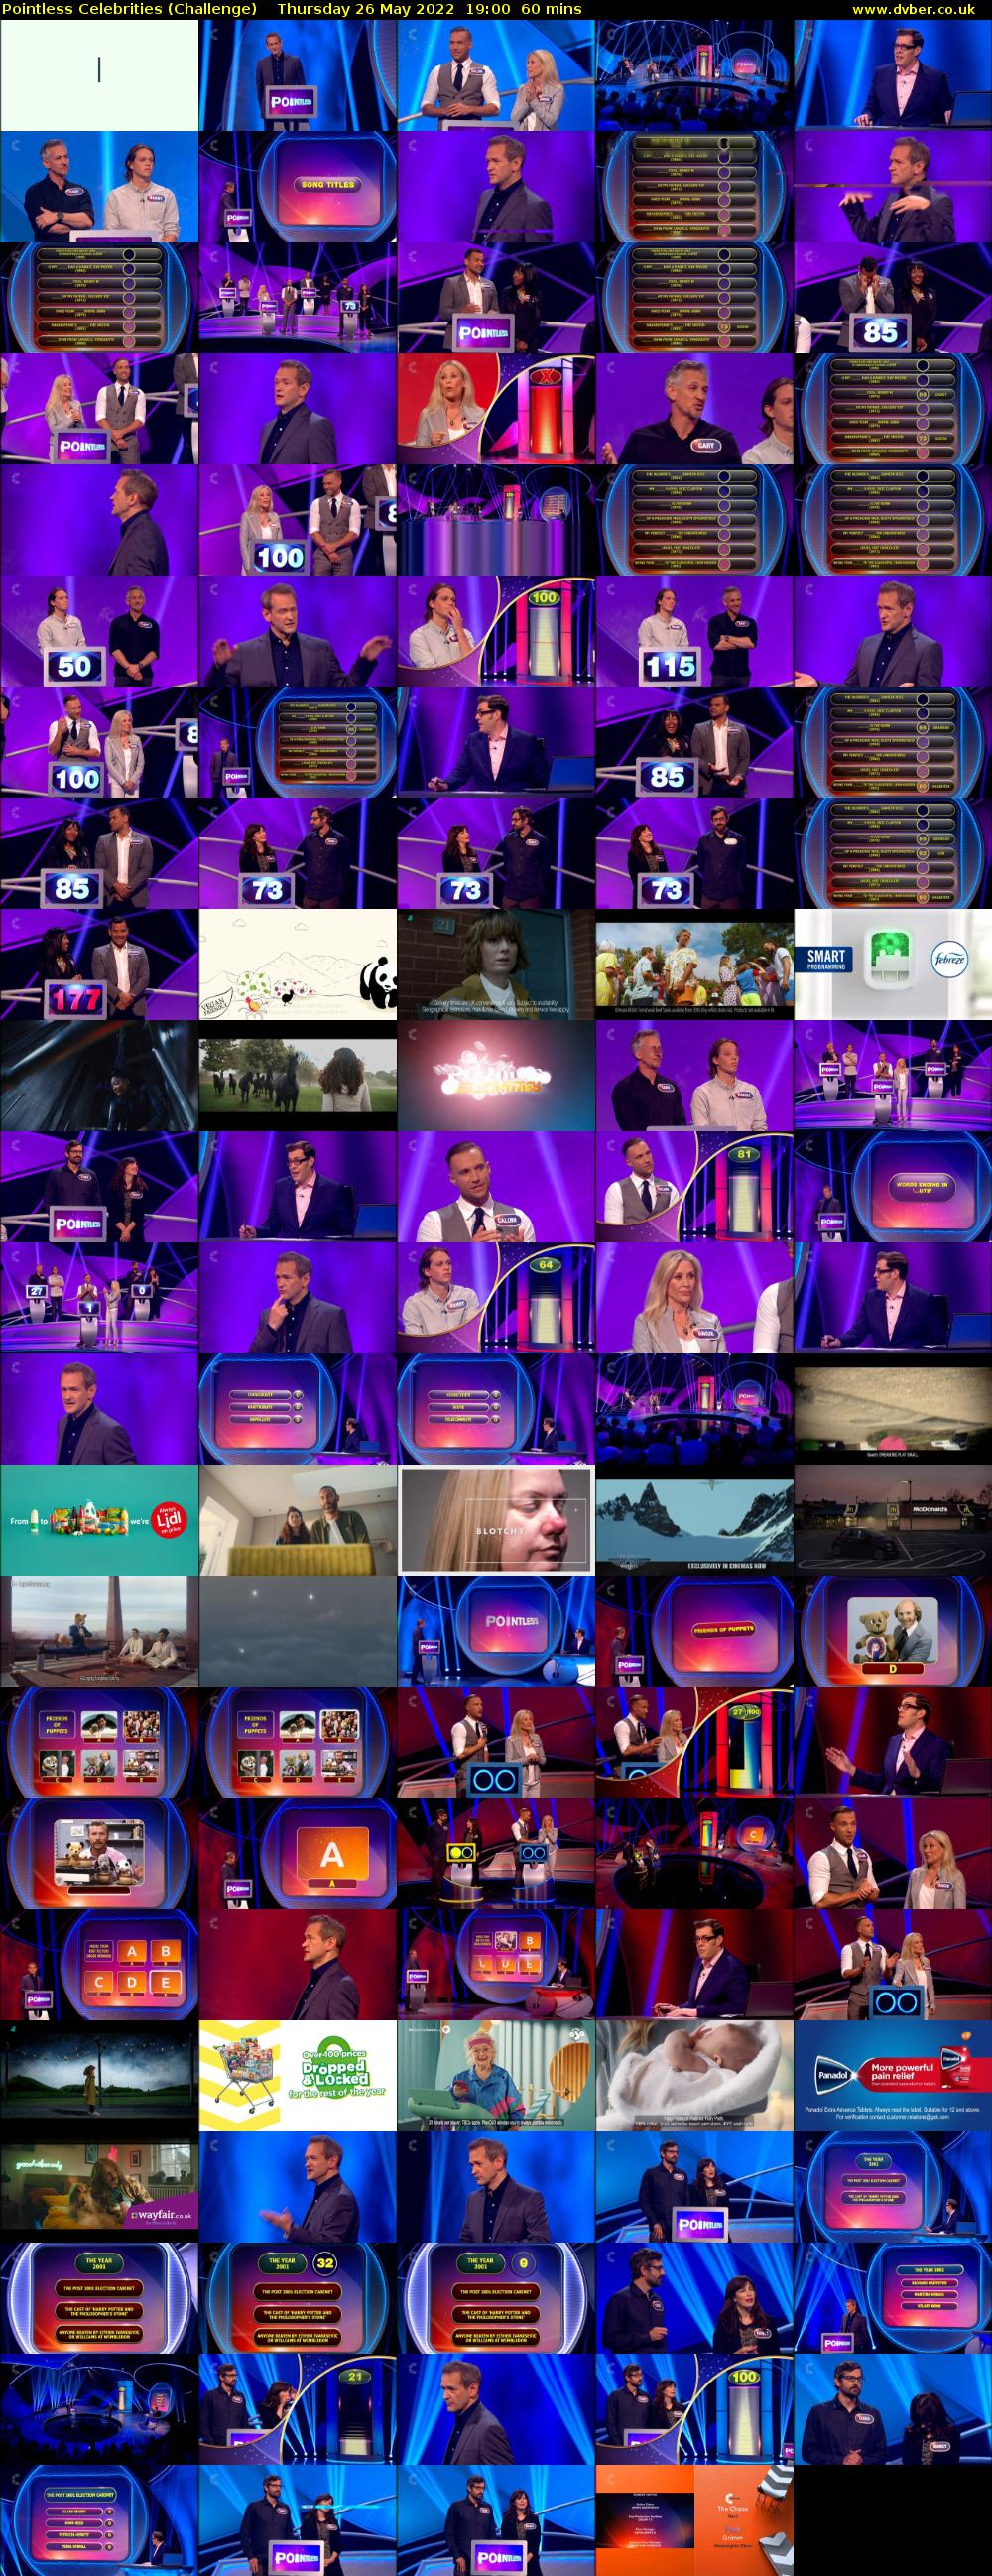 Pointless Celebrities (Challenge) Thursday 26 May 2022 19:00 - 20:00